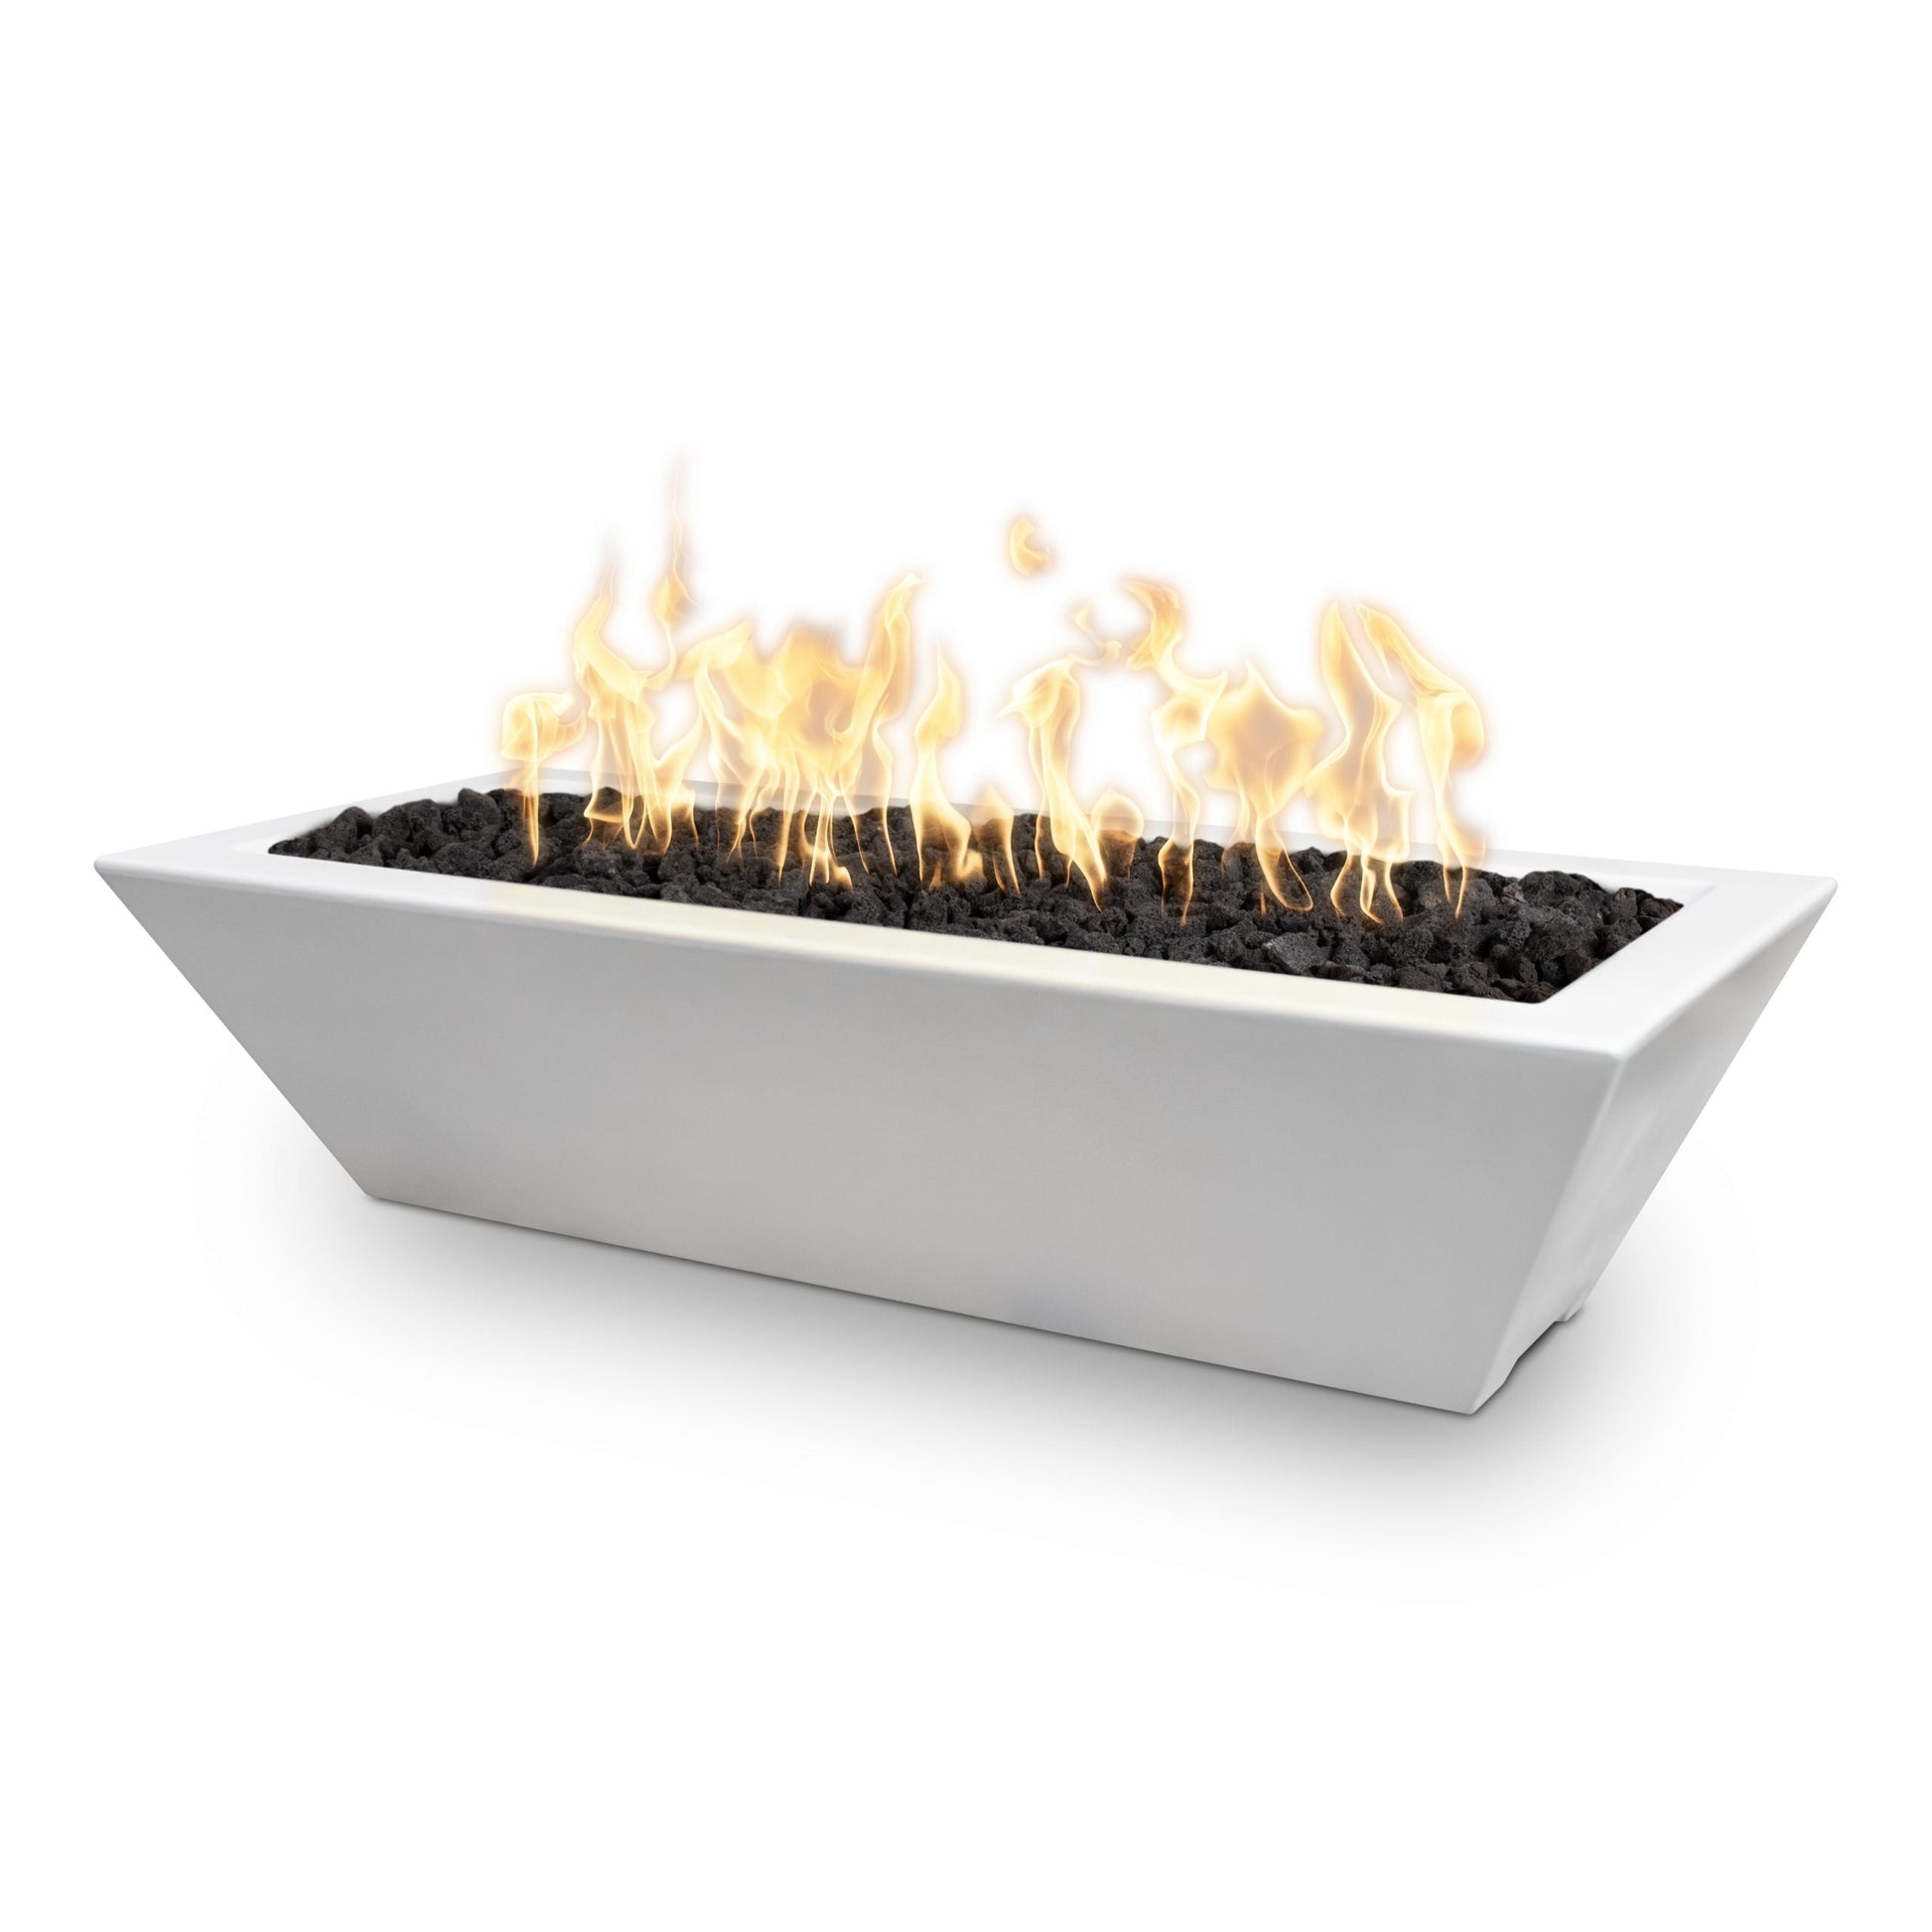 The Outdoor Plus Linear Maya 72" Chocolate GFRC Concrete Liquid Propane Fire Bowl with Match Lit with Flame Sense Ignition